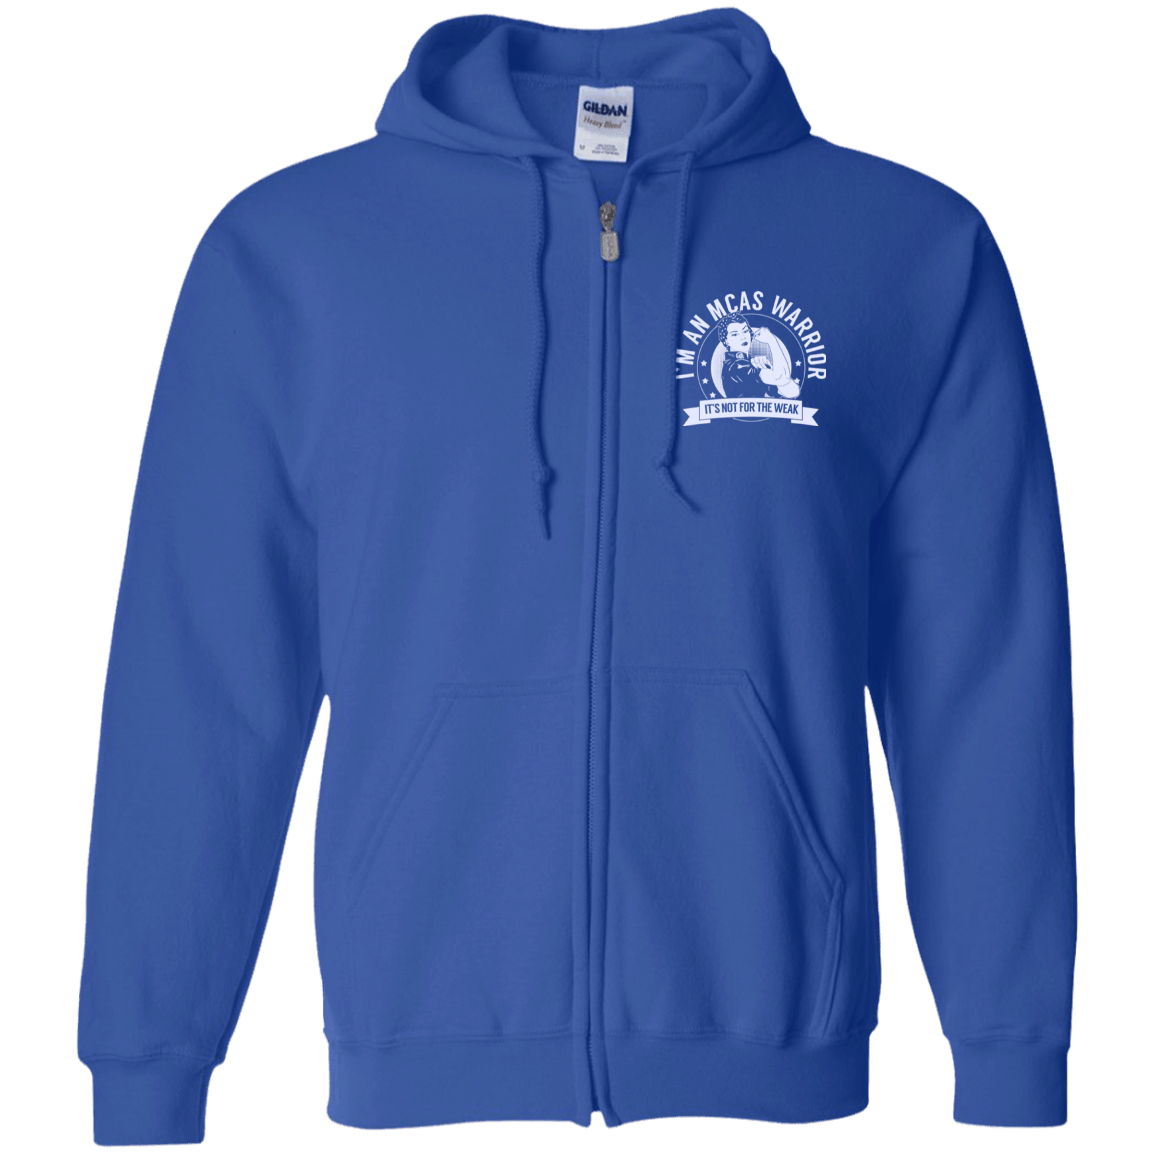 Mast Cell Activation Syndrome - MCAS Warrior NFTW Zip Up Hooded Sweatshirt - The Unchargeables